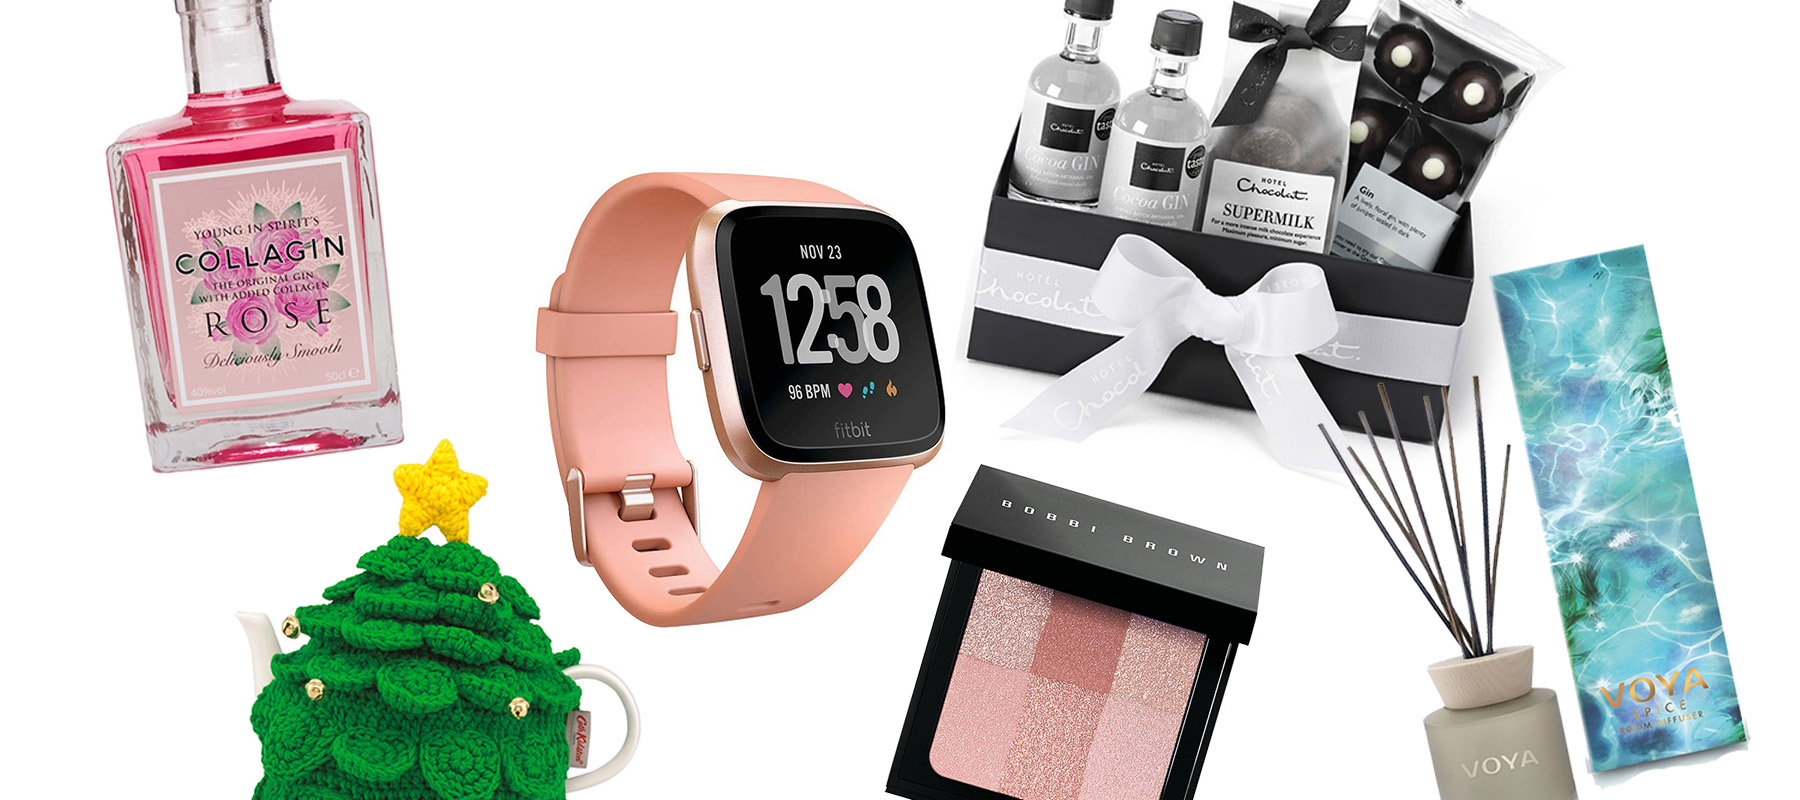 Best Gifts That Women in Their 40s Will Seriously Appreciate | Us Weekly